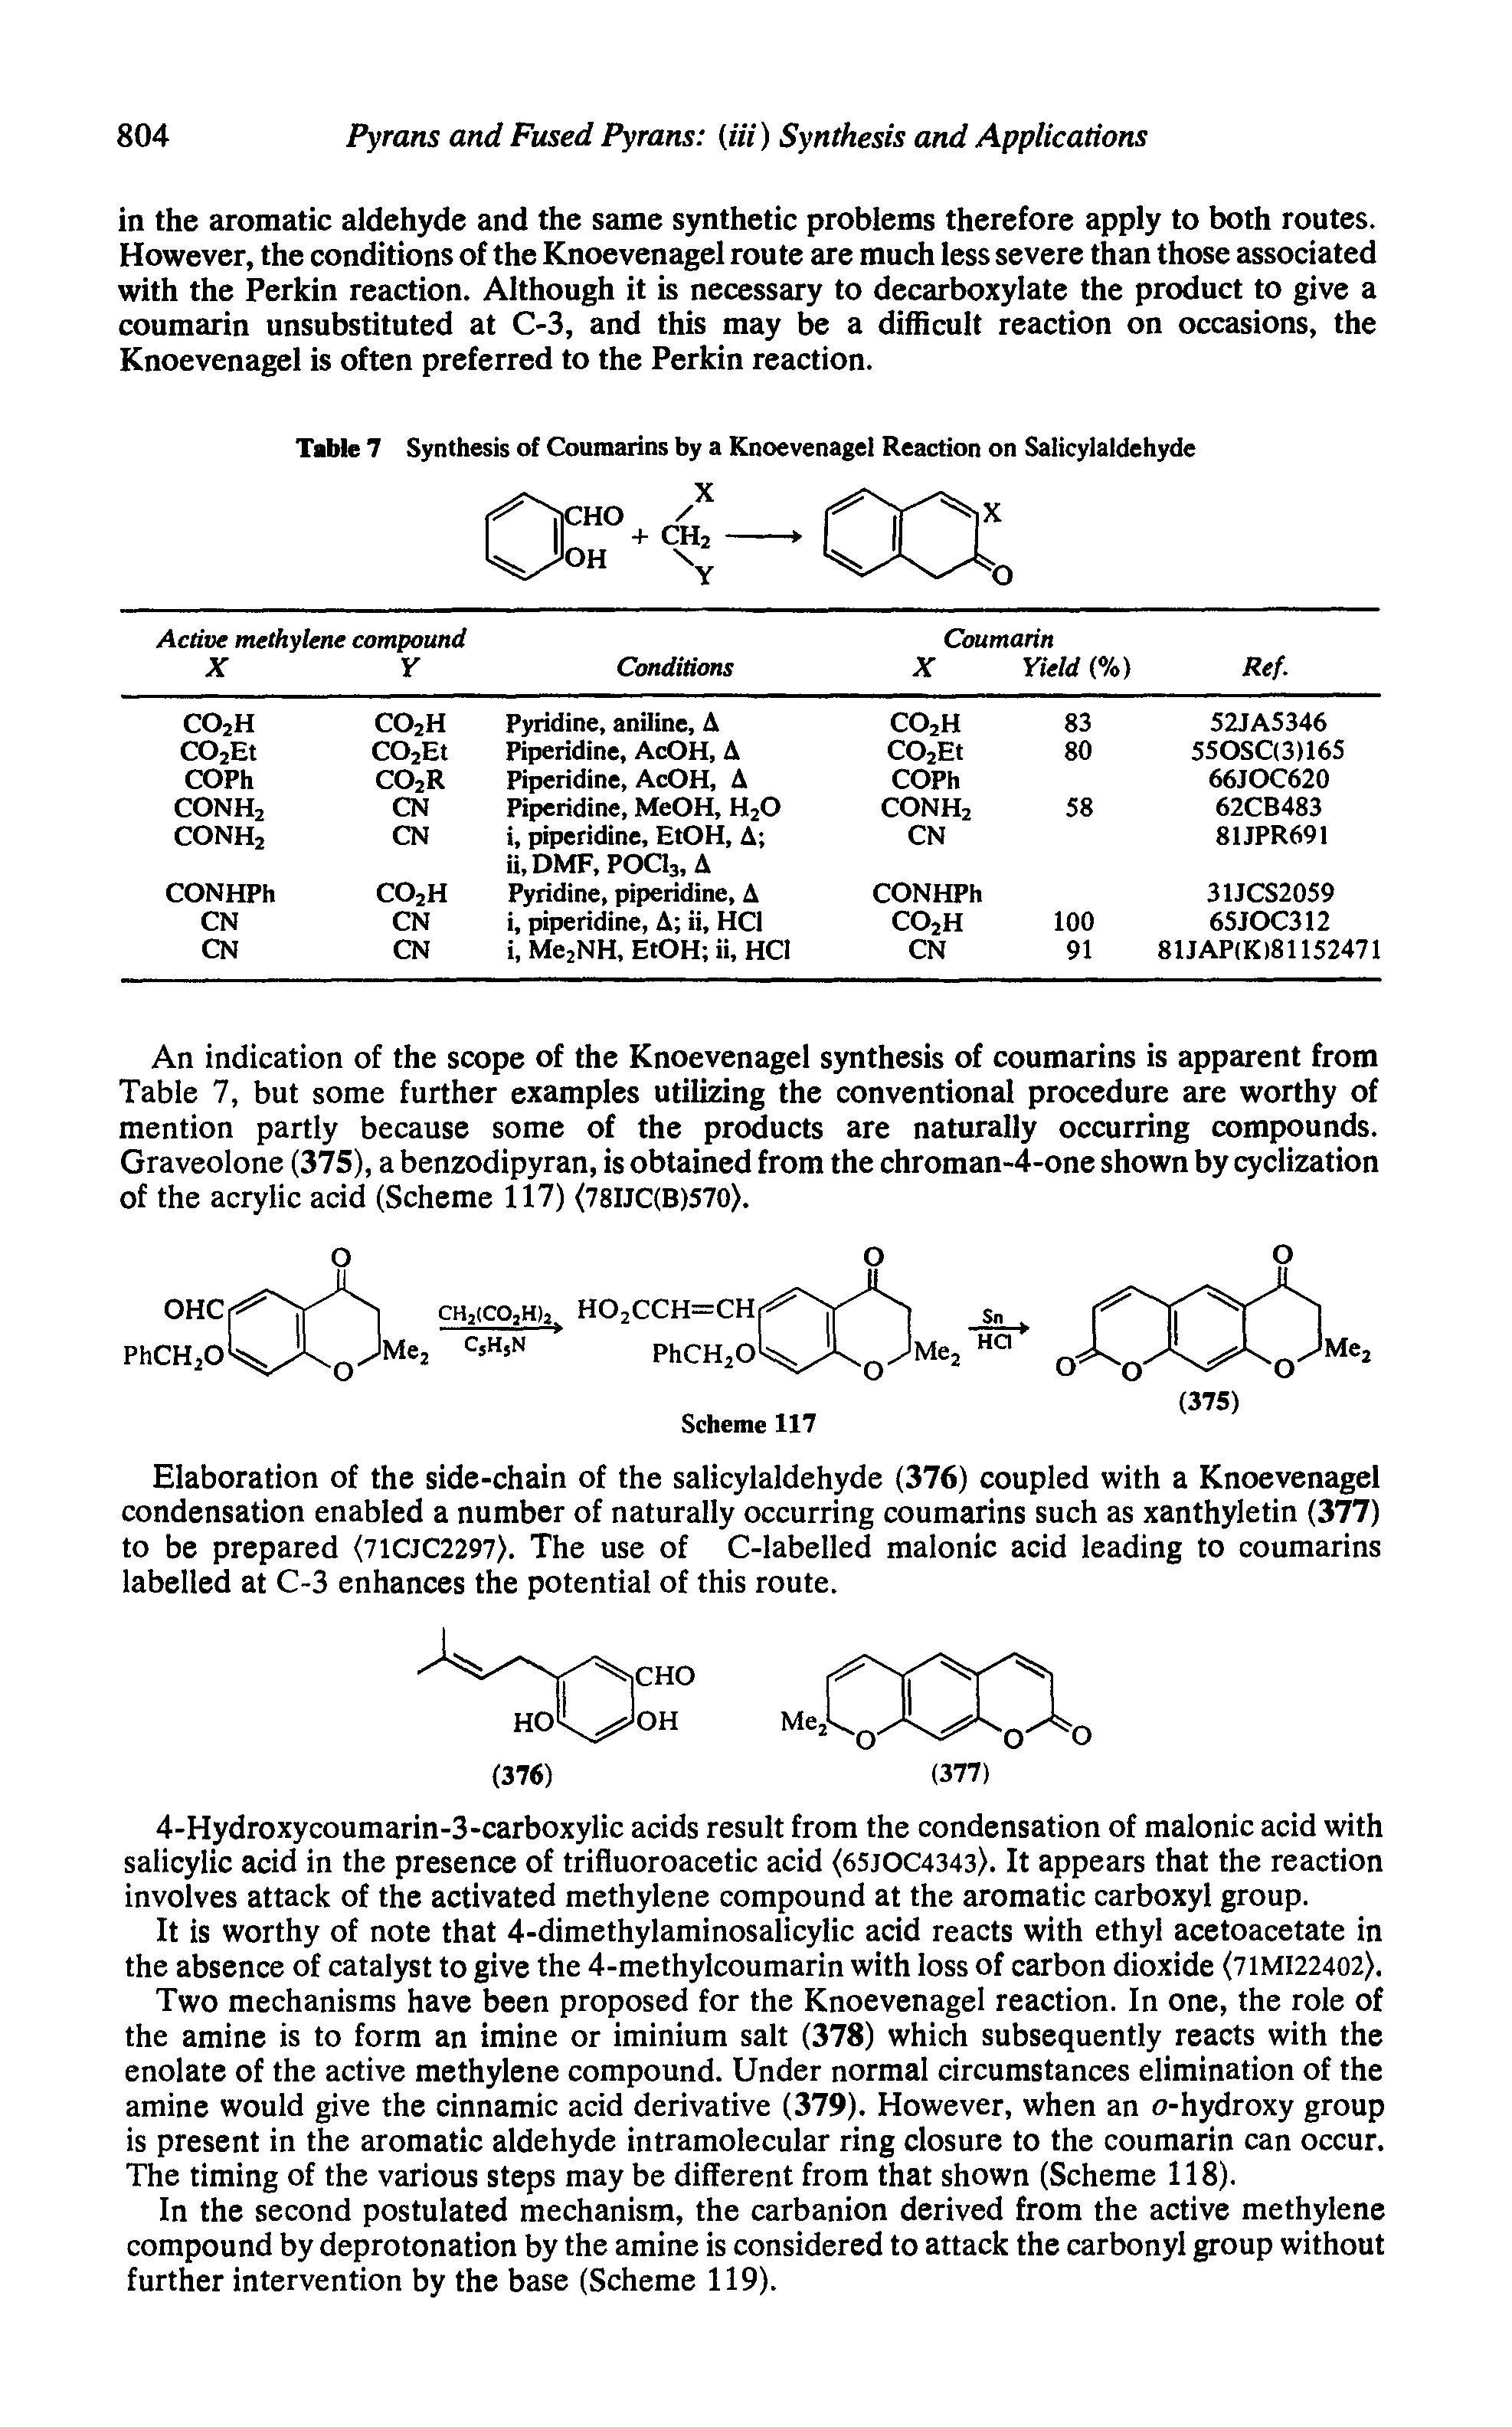 Table 7 Synthesis of Coumarins by a Knoevenagel Reaction on Salicylaldehyde...